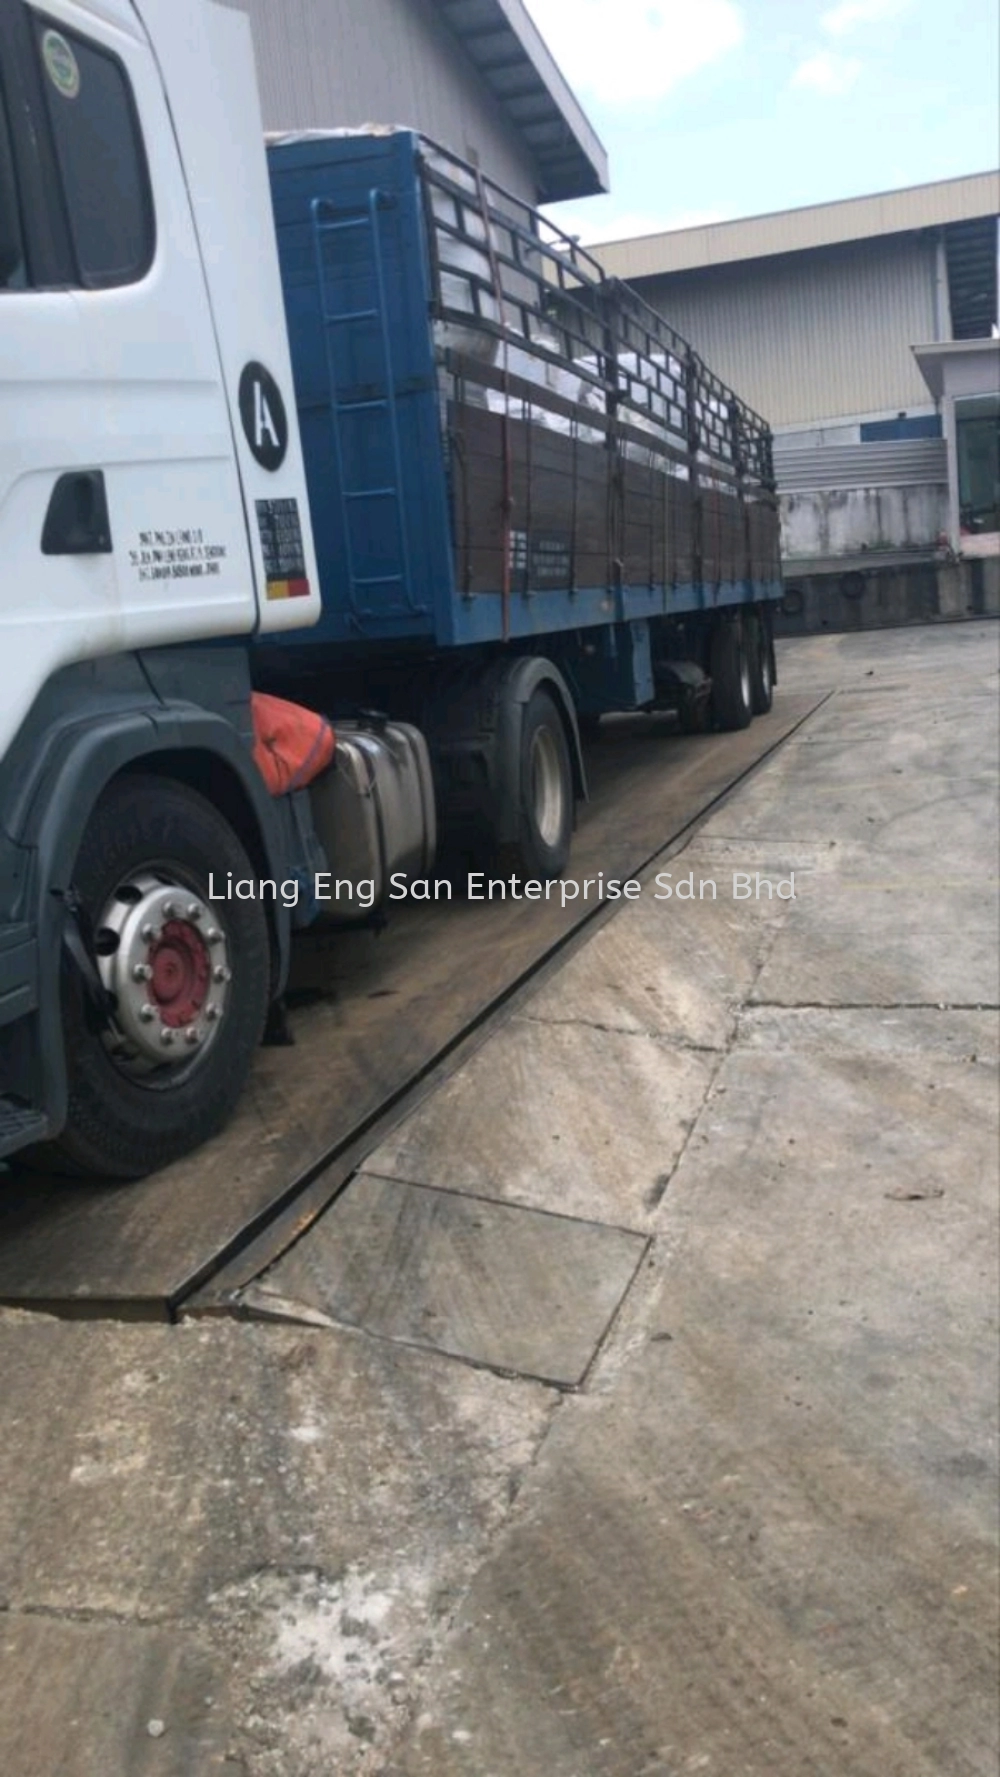 PROVIDE RENTAL OF 40FOOT TRUCK HIGH GATED CARGO 